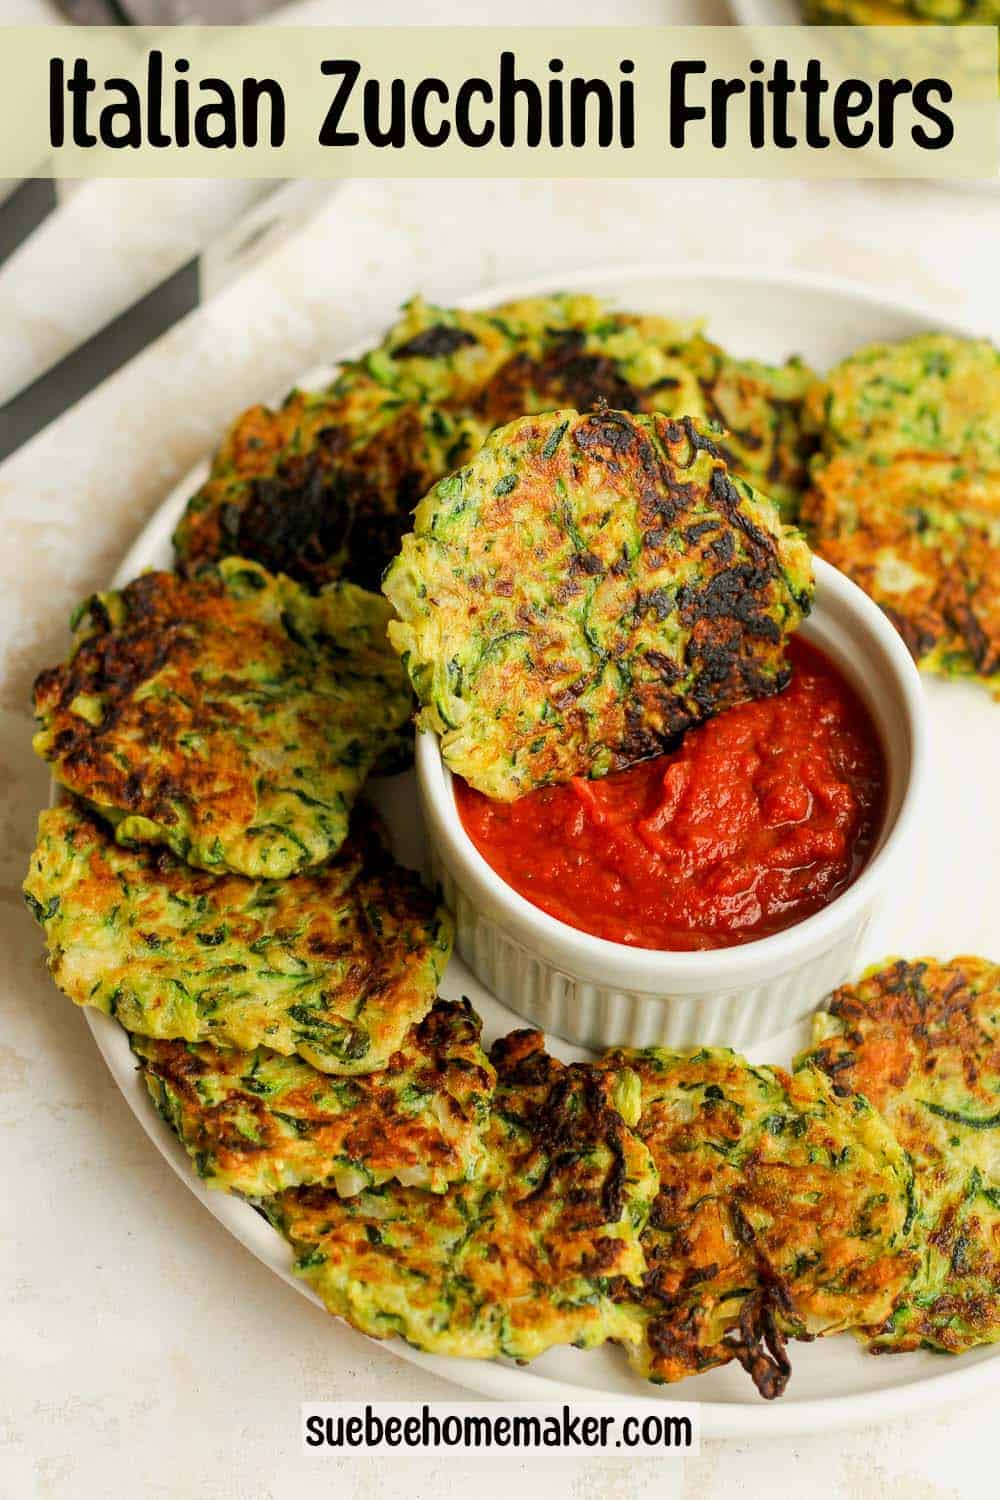 A plate of Italian zucchini fritters with a bowl of sauce in the middle.